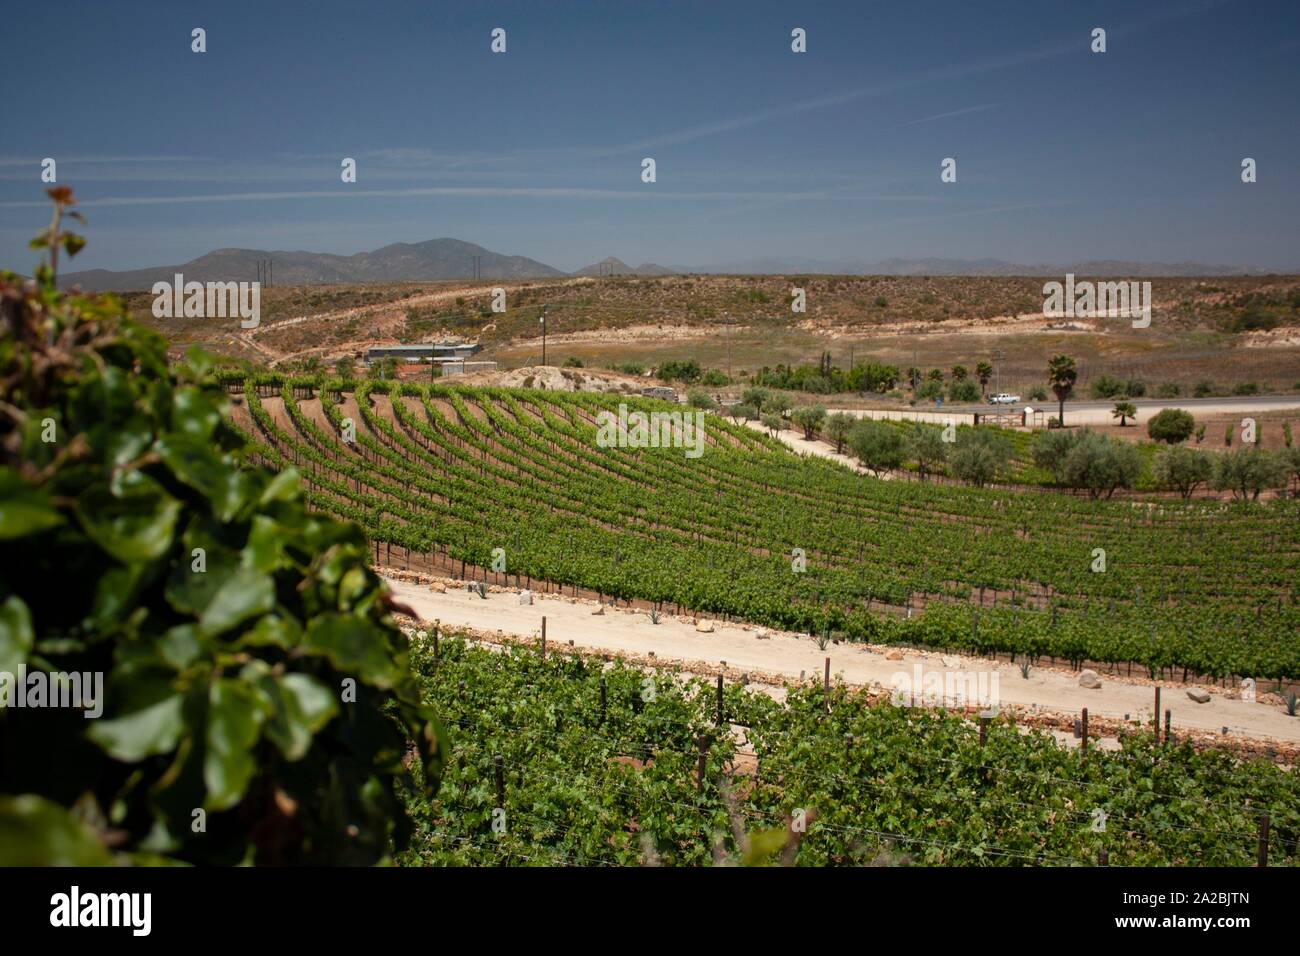 Vineyard valley bordered by mountains shows the curved roads formed by vine trees planted. Baja California, Mexico. Stock Photo